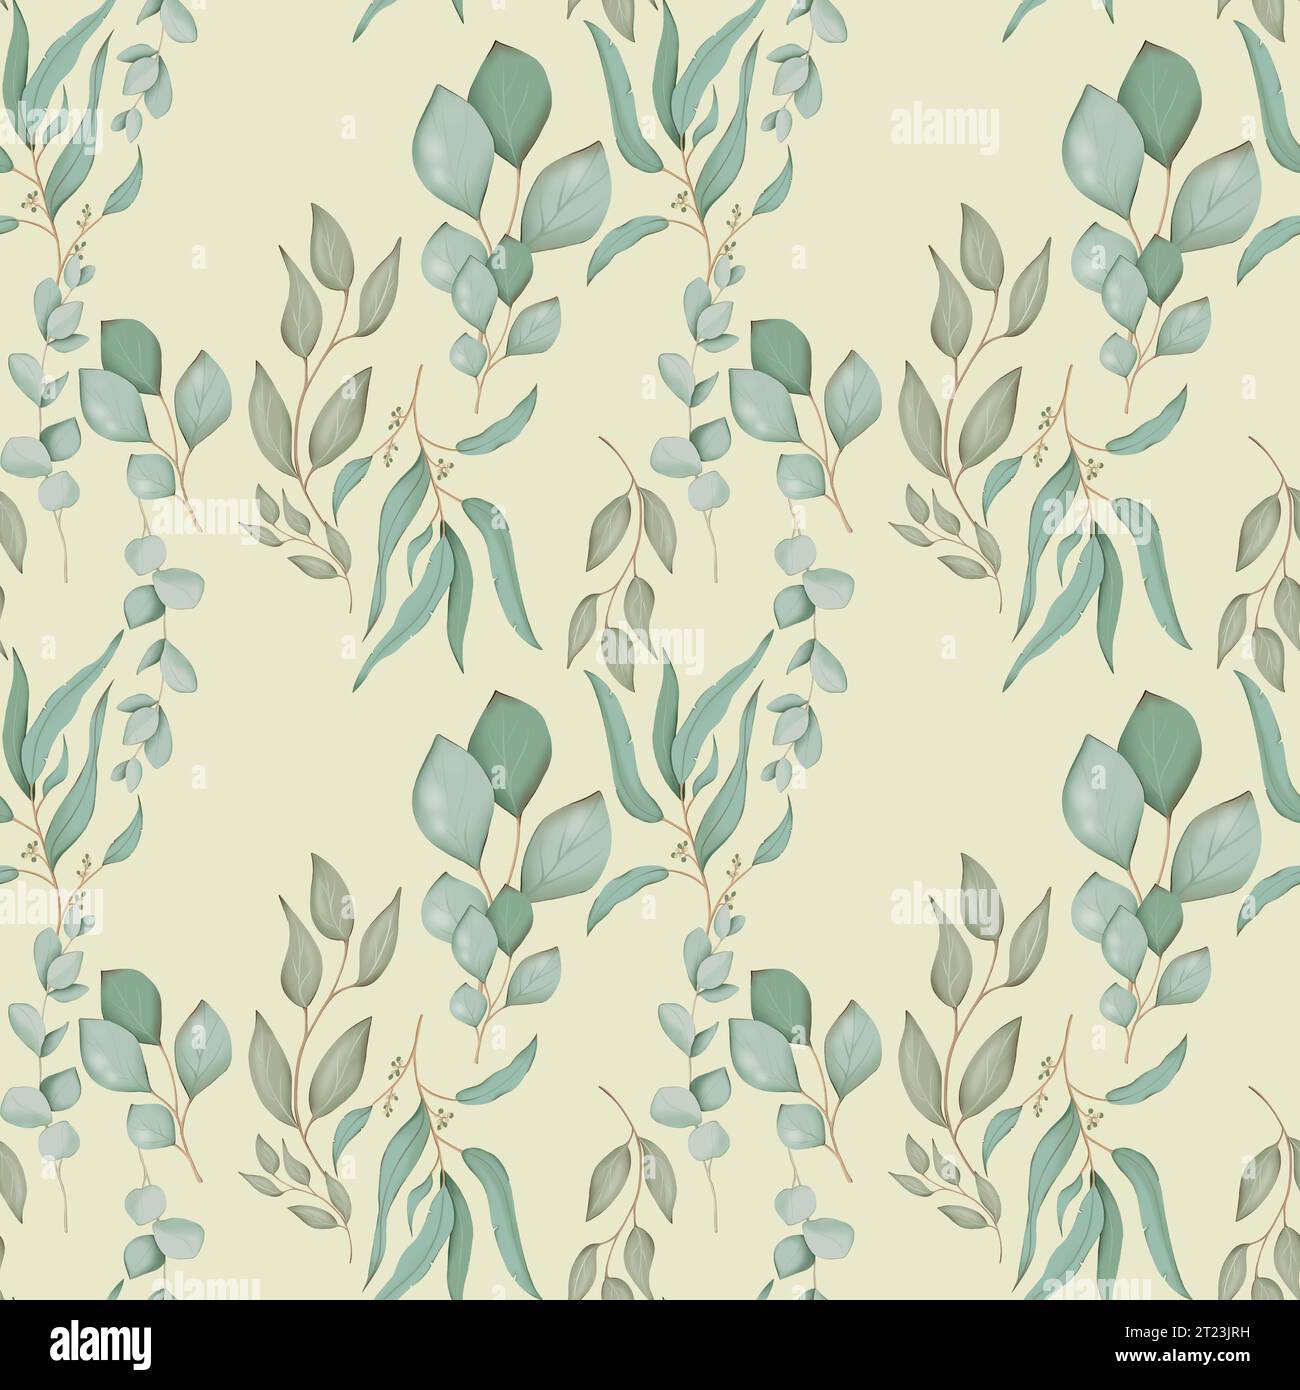 Seamless pattern with eucalyptus leaves Stock Photo